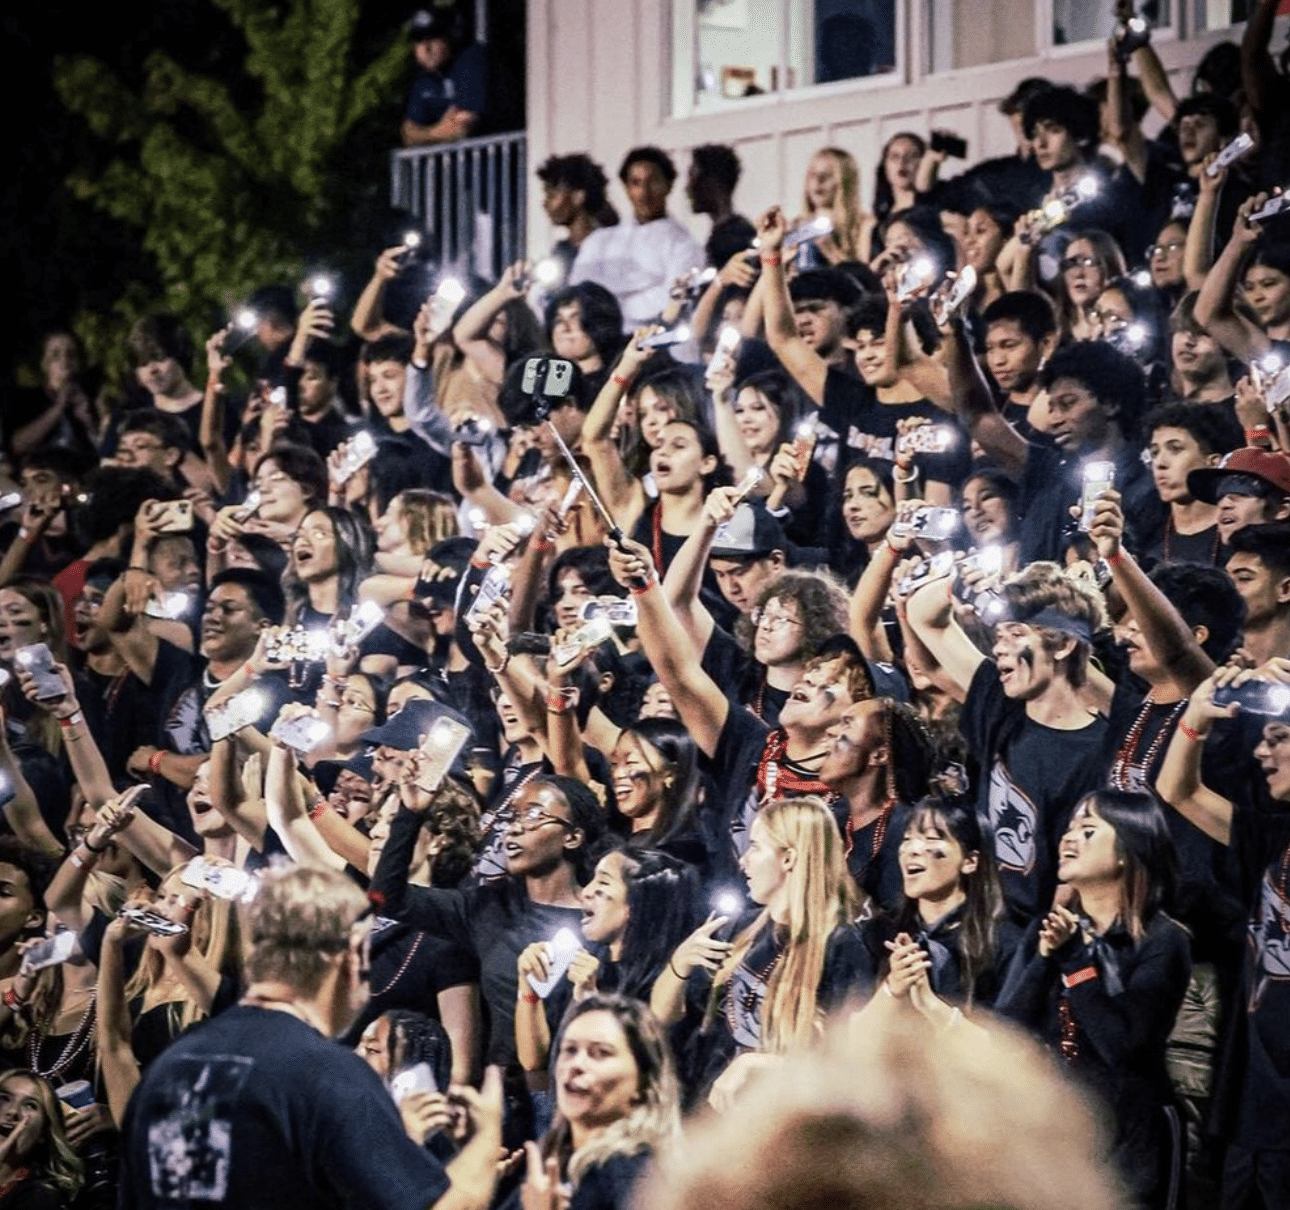 Laguna Beach High School student section in the bleachers, waving their phone lights, illuminating the stands with a sea of lights and school spirit.